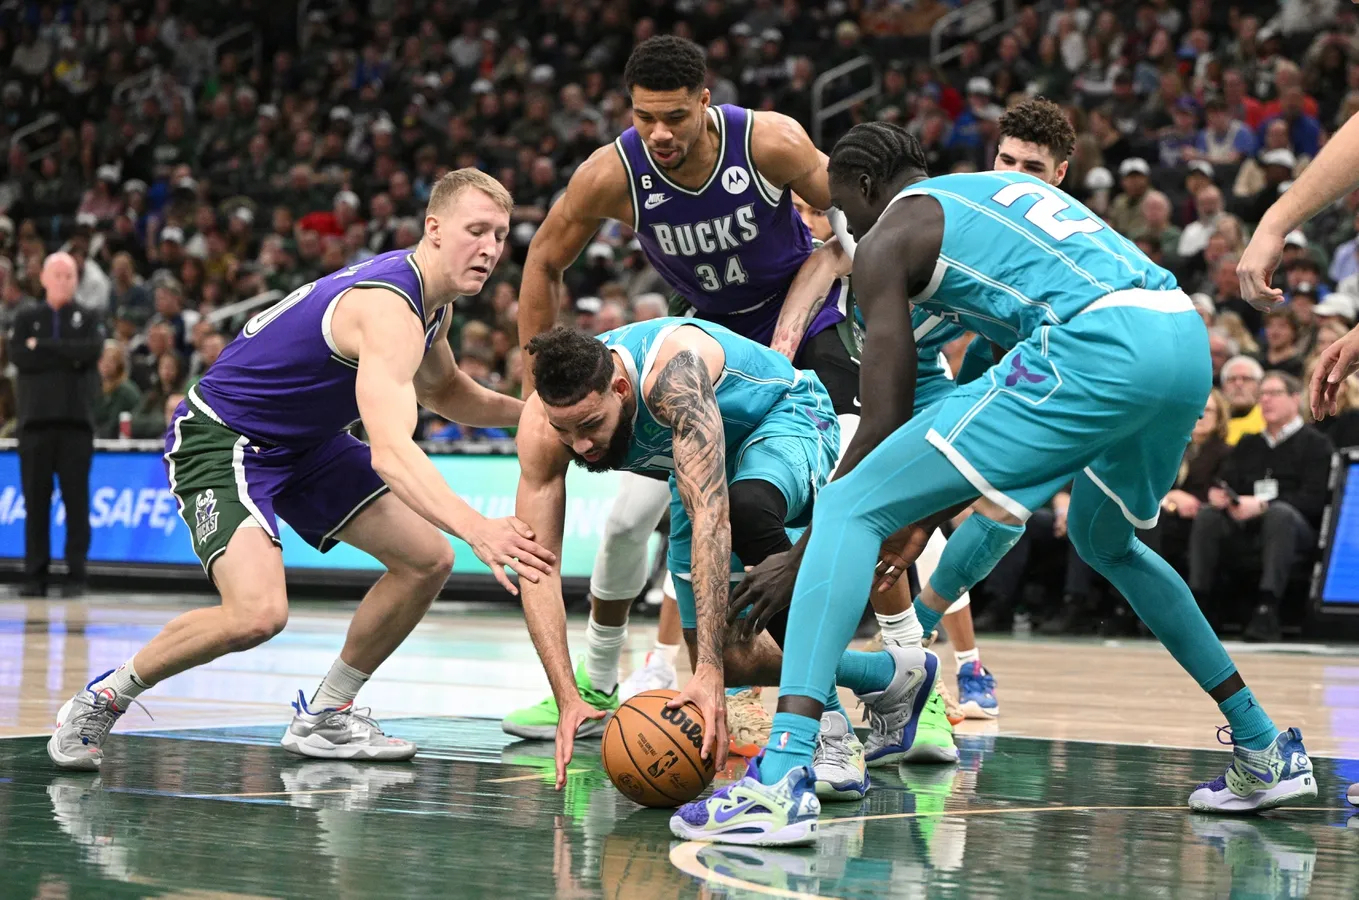 Washington Wizards guard Russell Westbrook (4) dribbles the ball during the  second half of an NBA basketball game against Milwaukee Bucks forward  Giannis Antetokounmpo (34), Saturday, March 13, 2021, in Washington. The